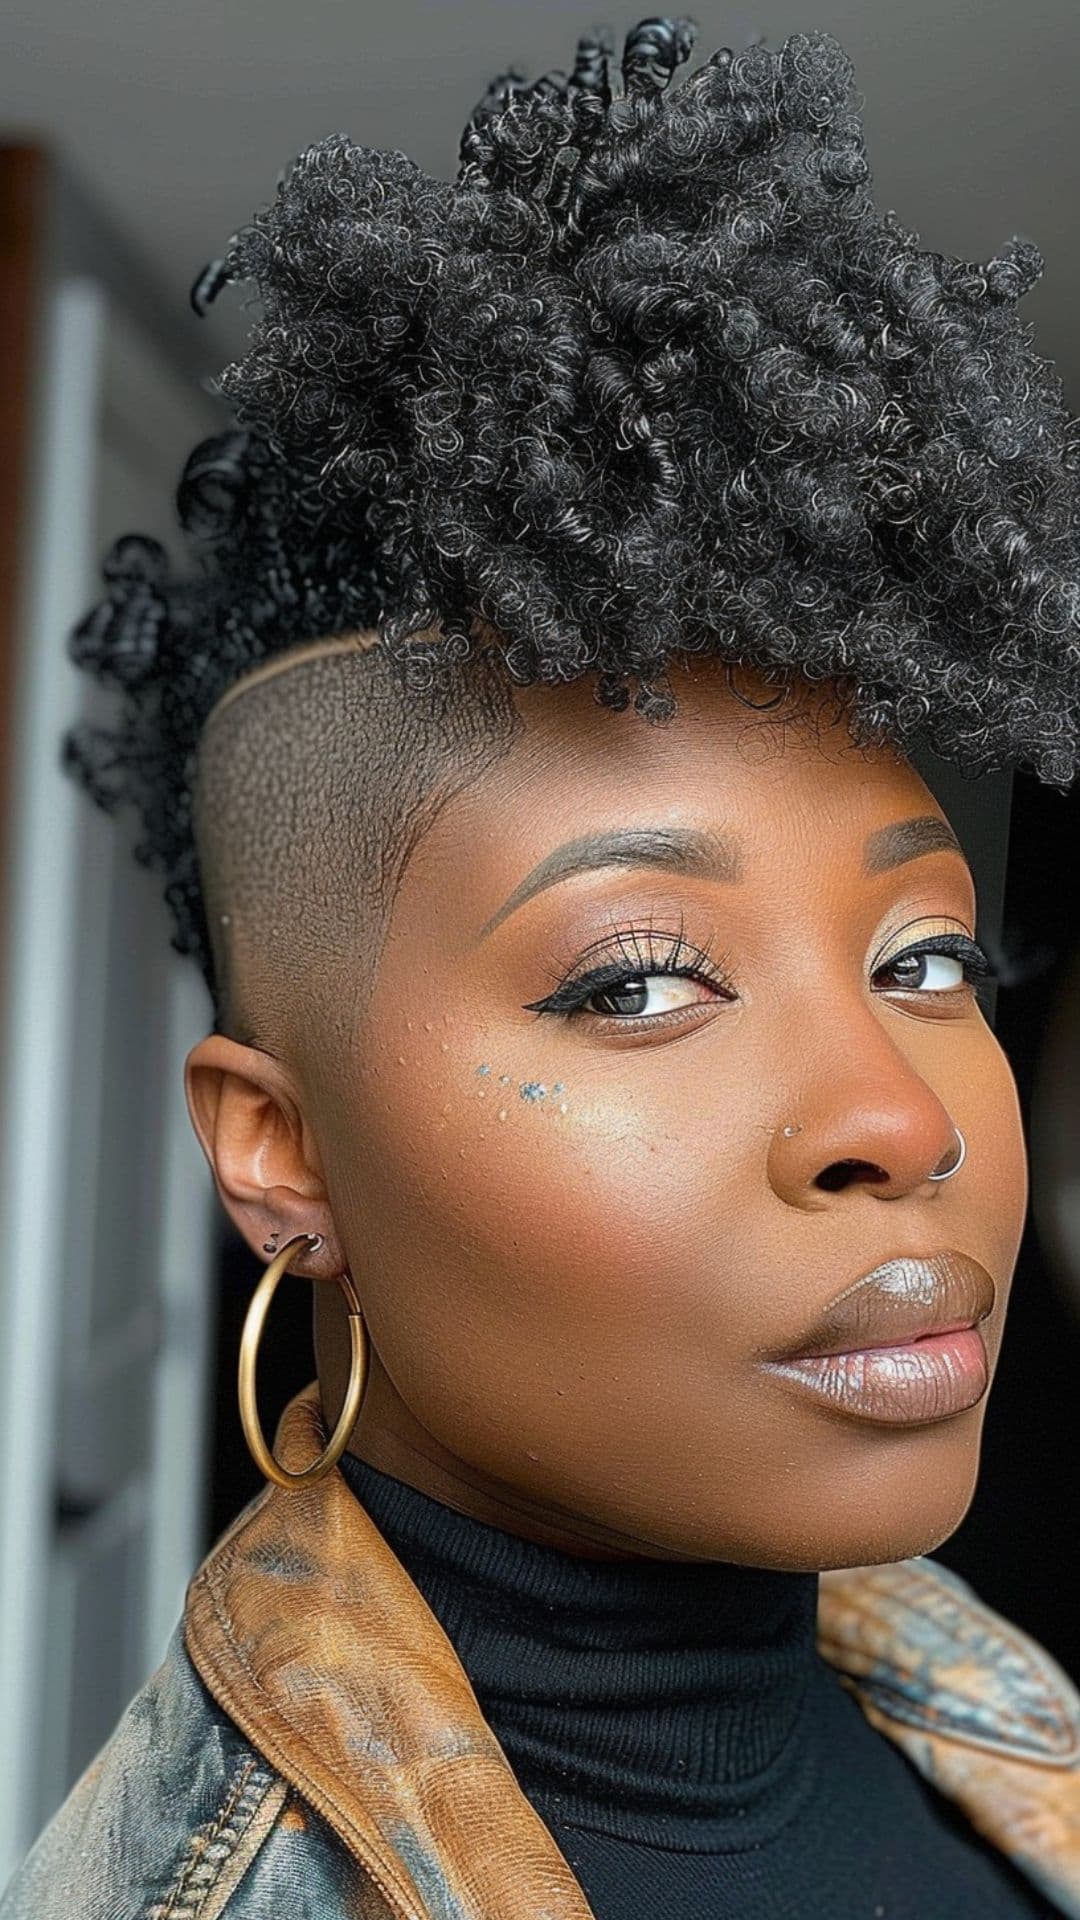 A black woman modelling a curly mohawk hairstyle.